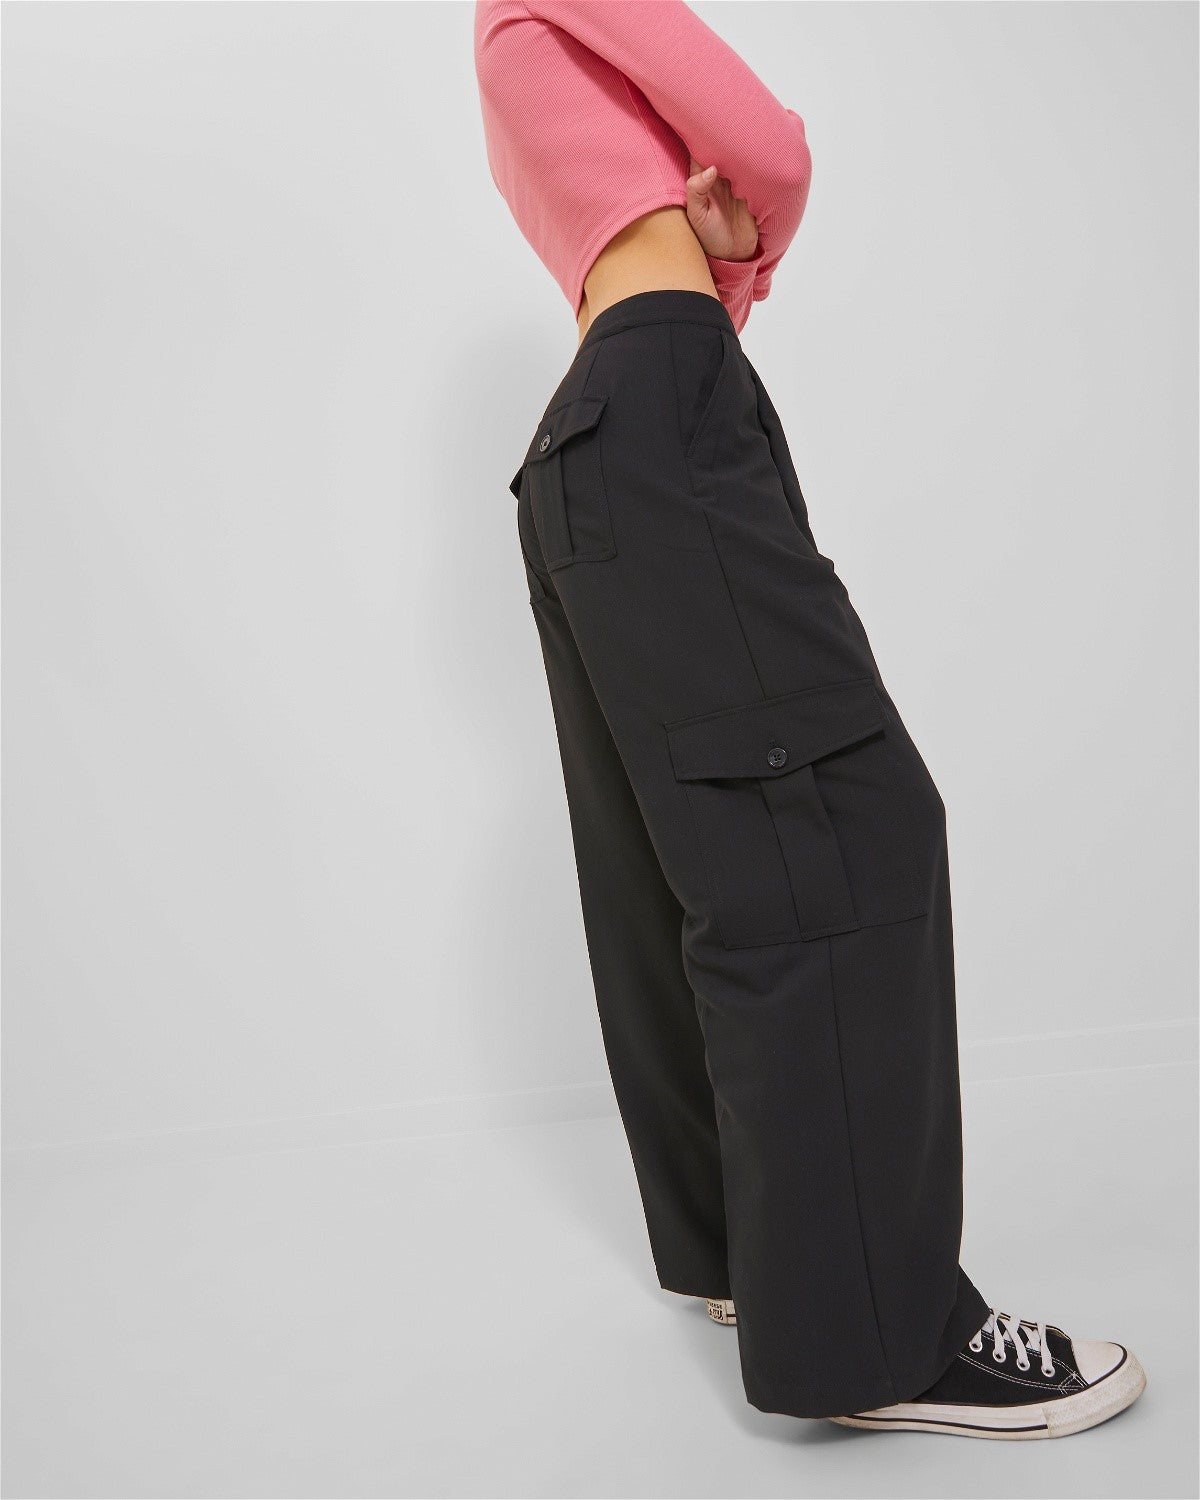 JXMARY Cargo Suit Trousers